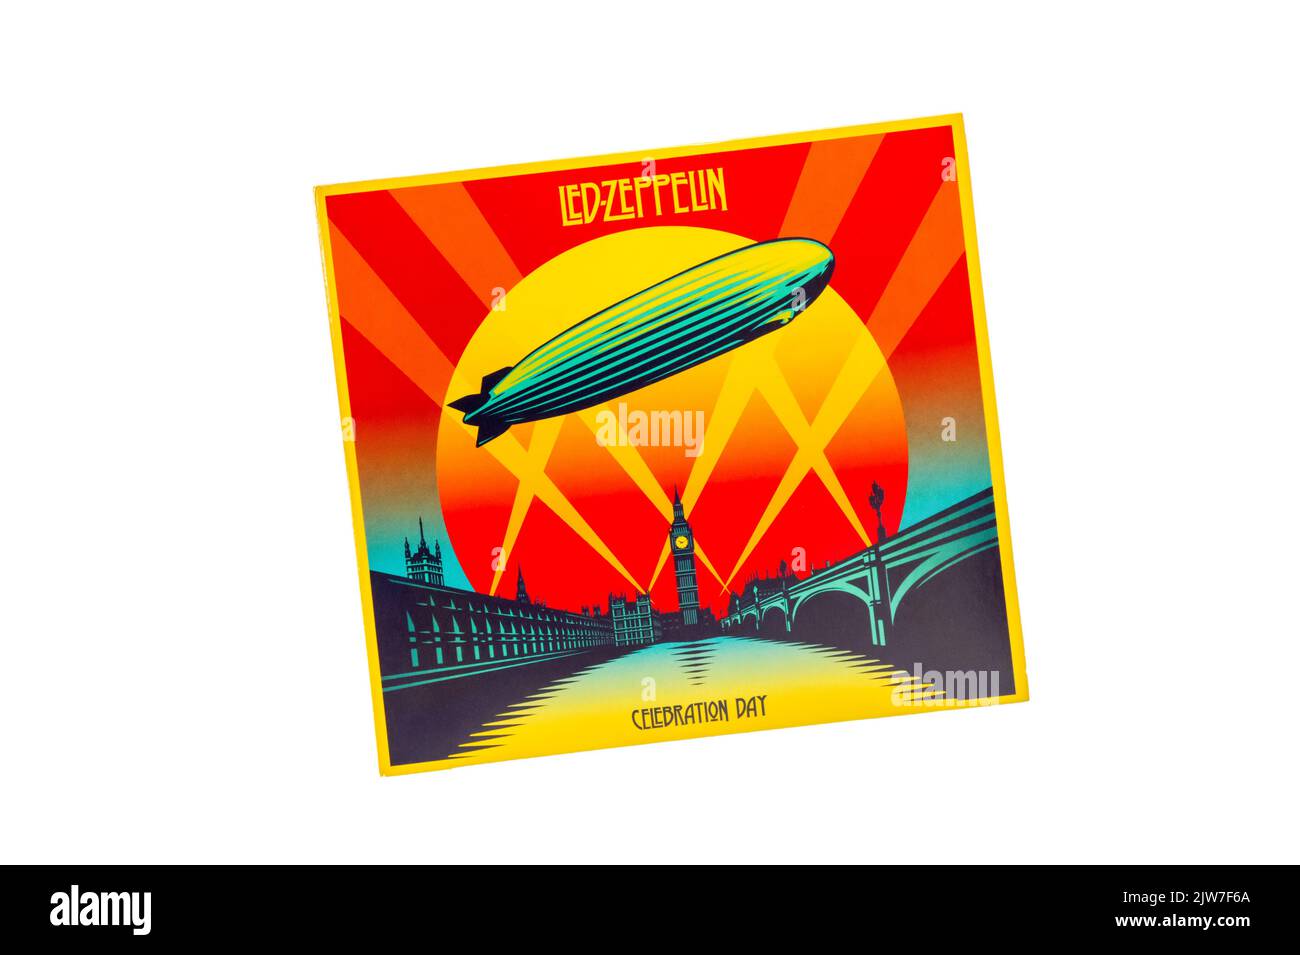 Celebration Day is a live album CD of the Led Zeppelin concert at the O2 Arena in 2007. Stock Photo